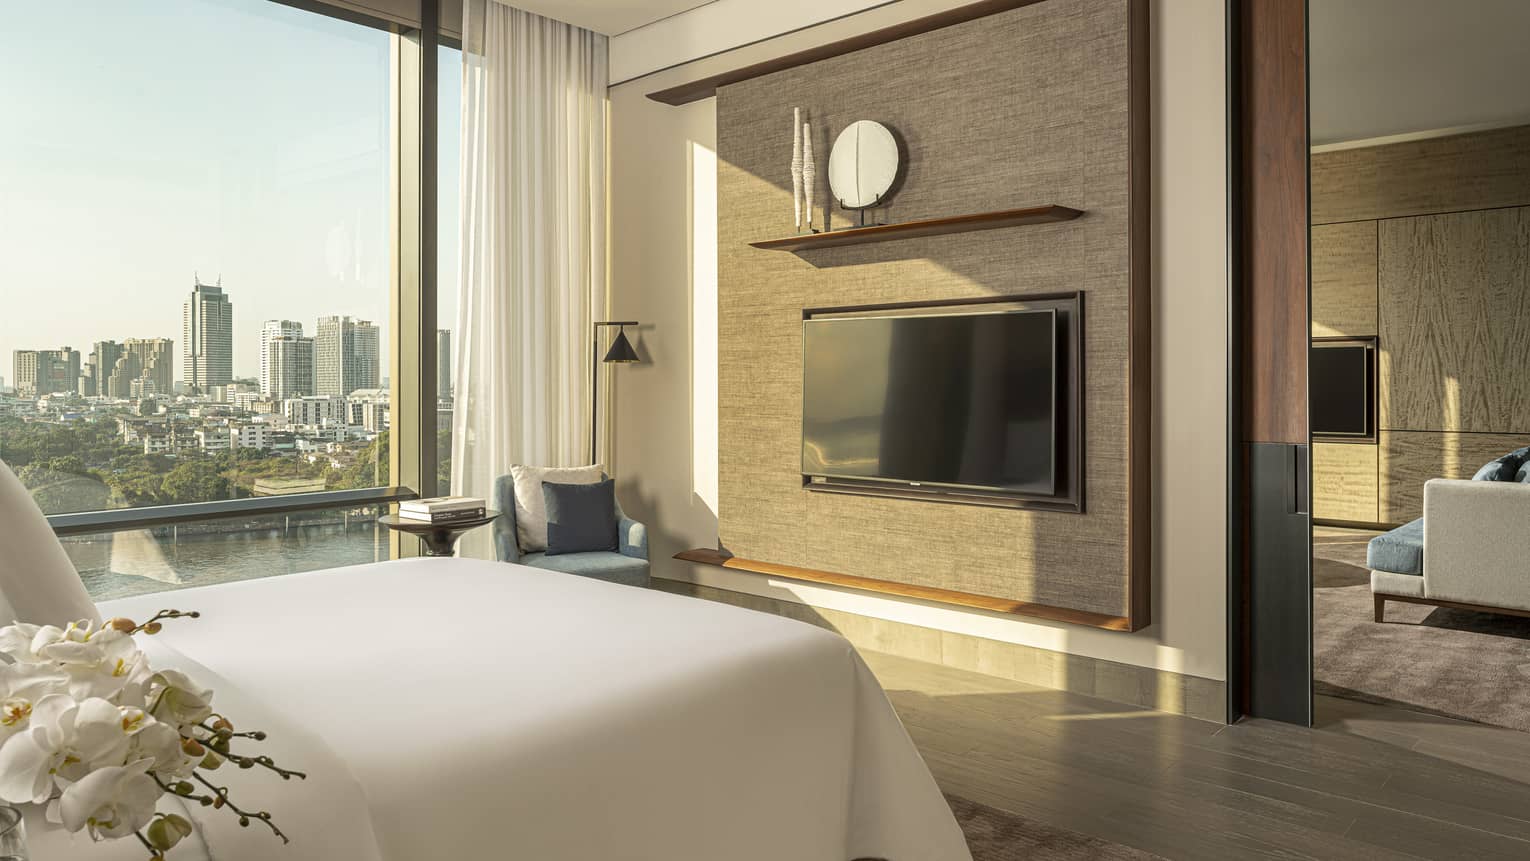 White king bed facing dark tan wall with TV, display shelf beside tall window with river and city view